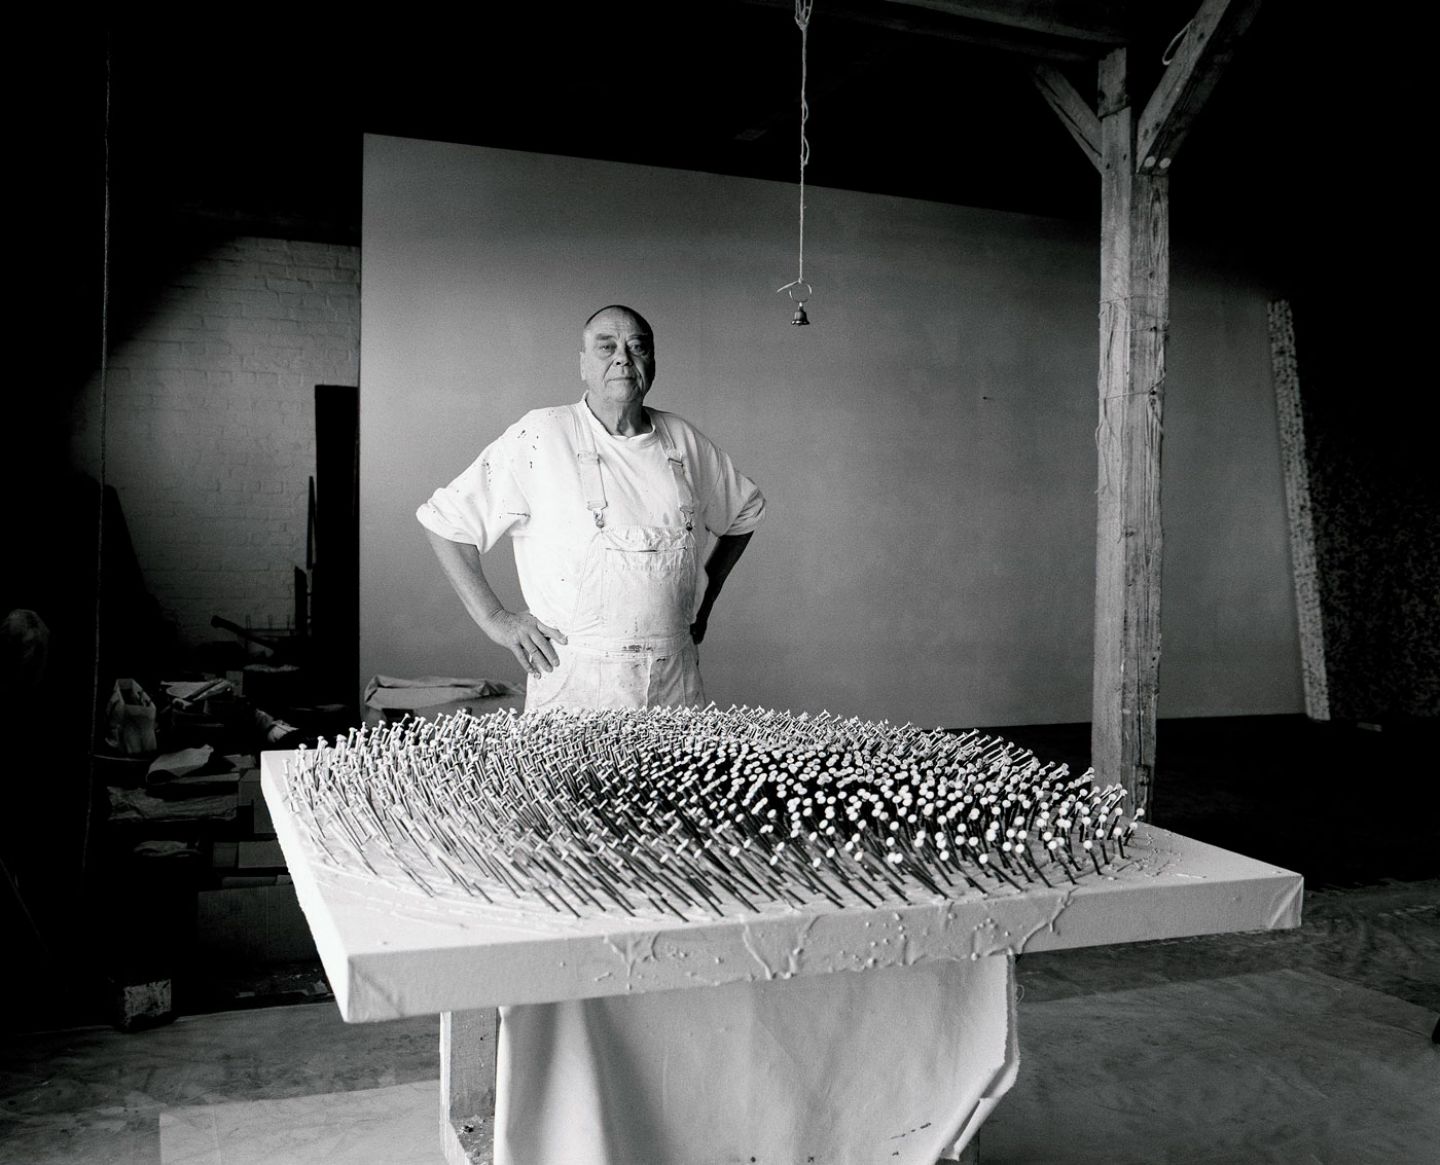 Artist Günther Uecker standing in front of his artwork, a bed of nails